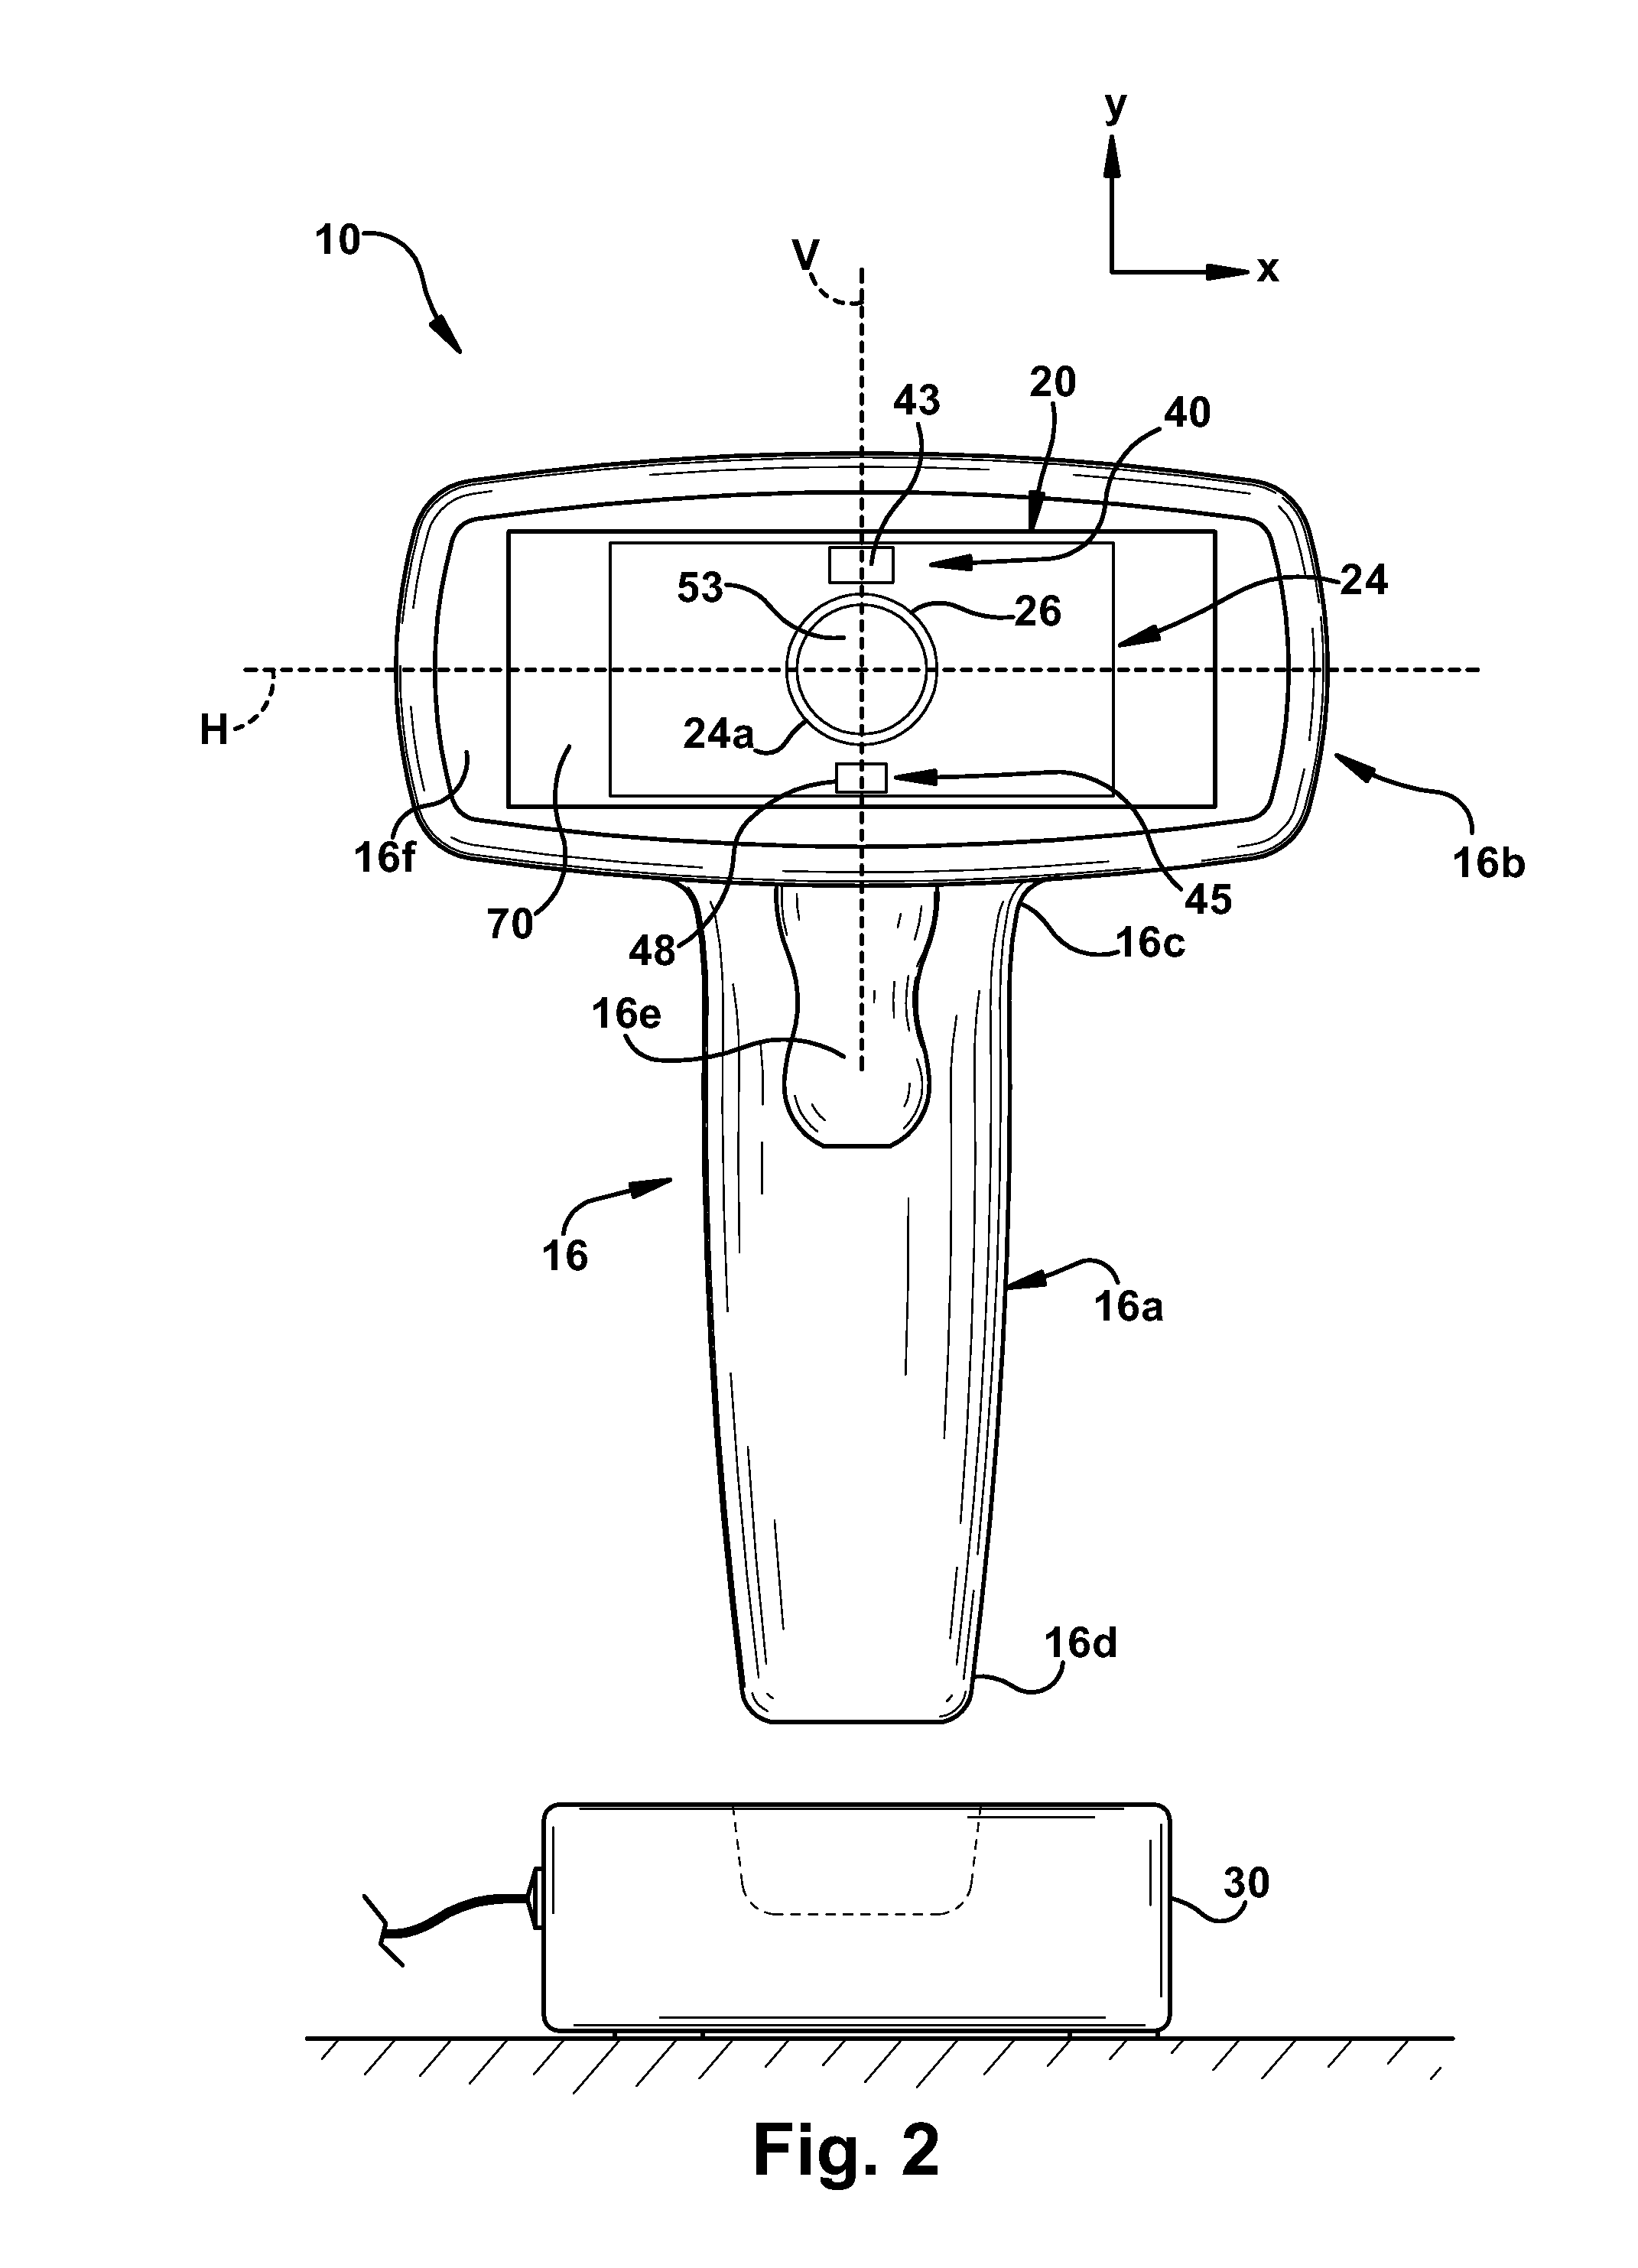 Automatic Region of Interest Focusing for an Imaging-Based Bar Code Reader